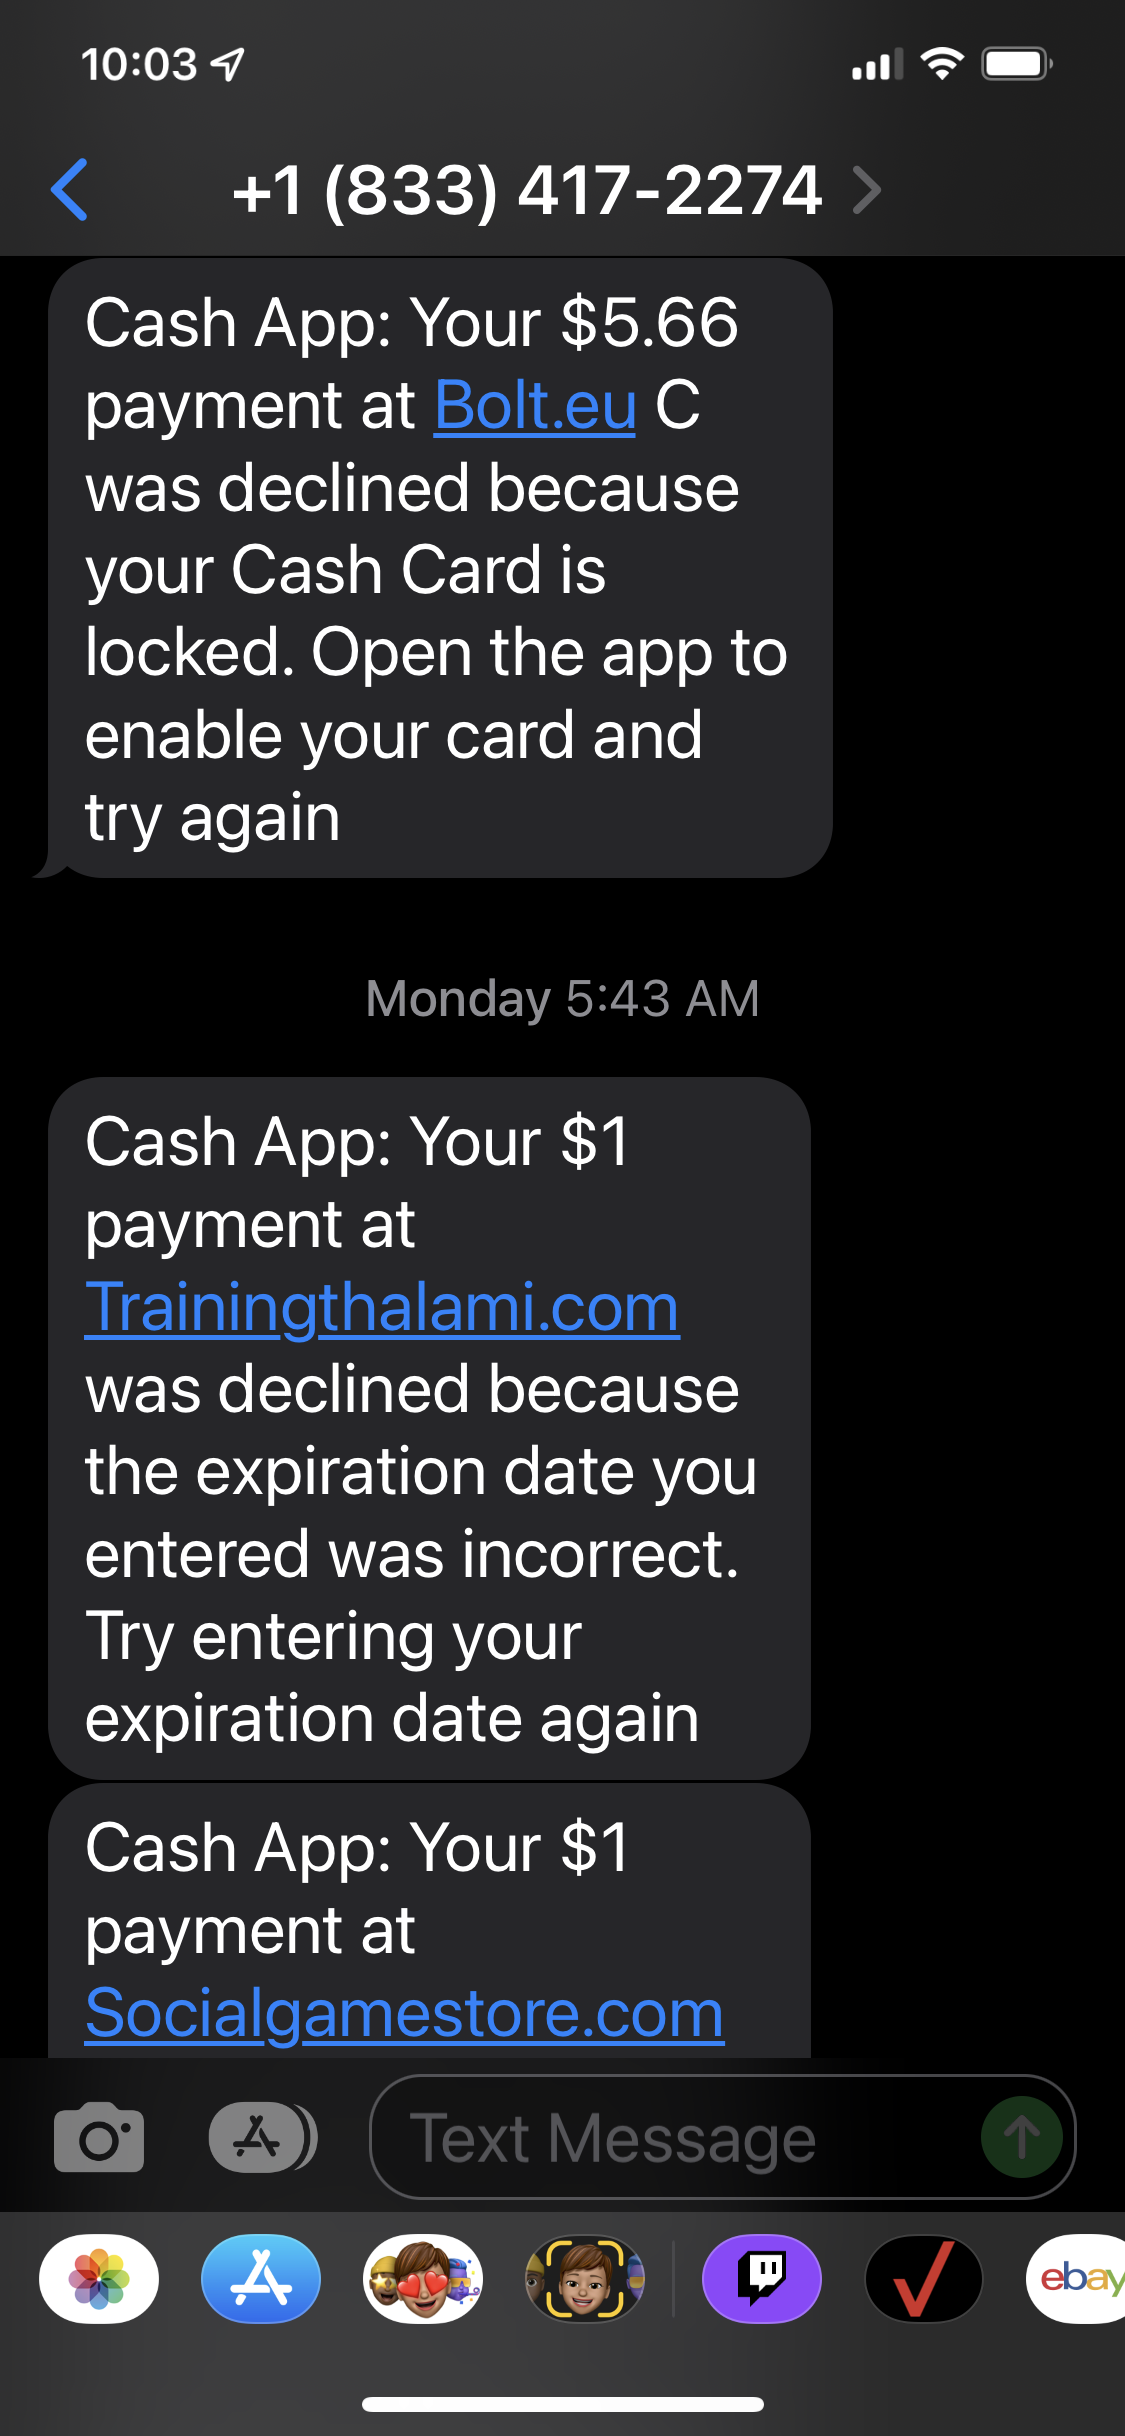 Cash App complaint Fraudulent attempts to place charges on my card